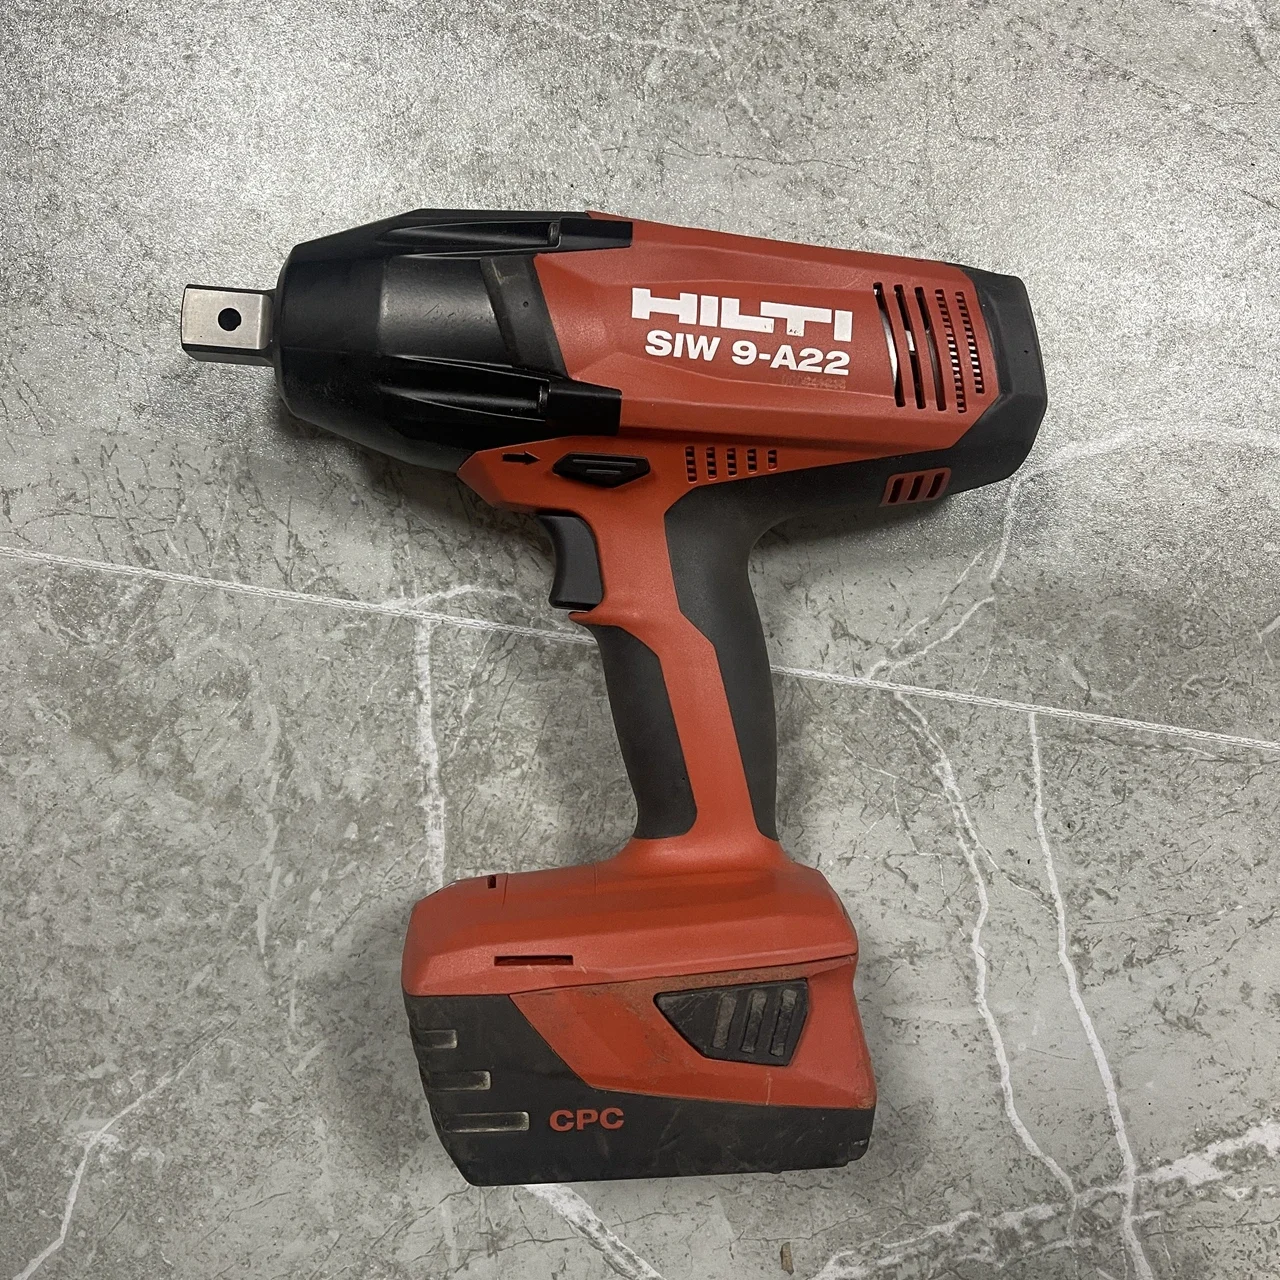 Hilti SIW 9-A22 Cordless Impact Wrench -Includes 5.2AH lithium battery，second-hand